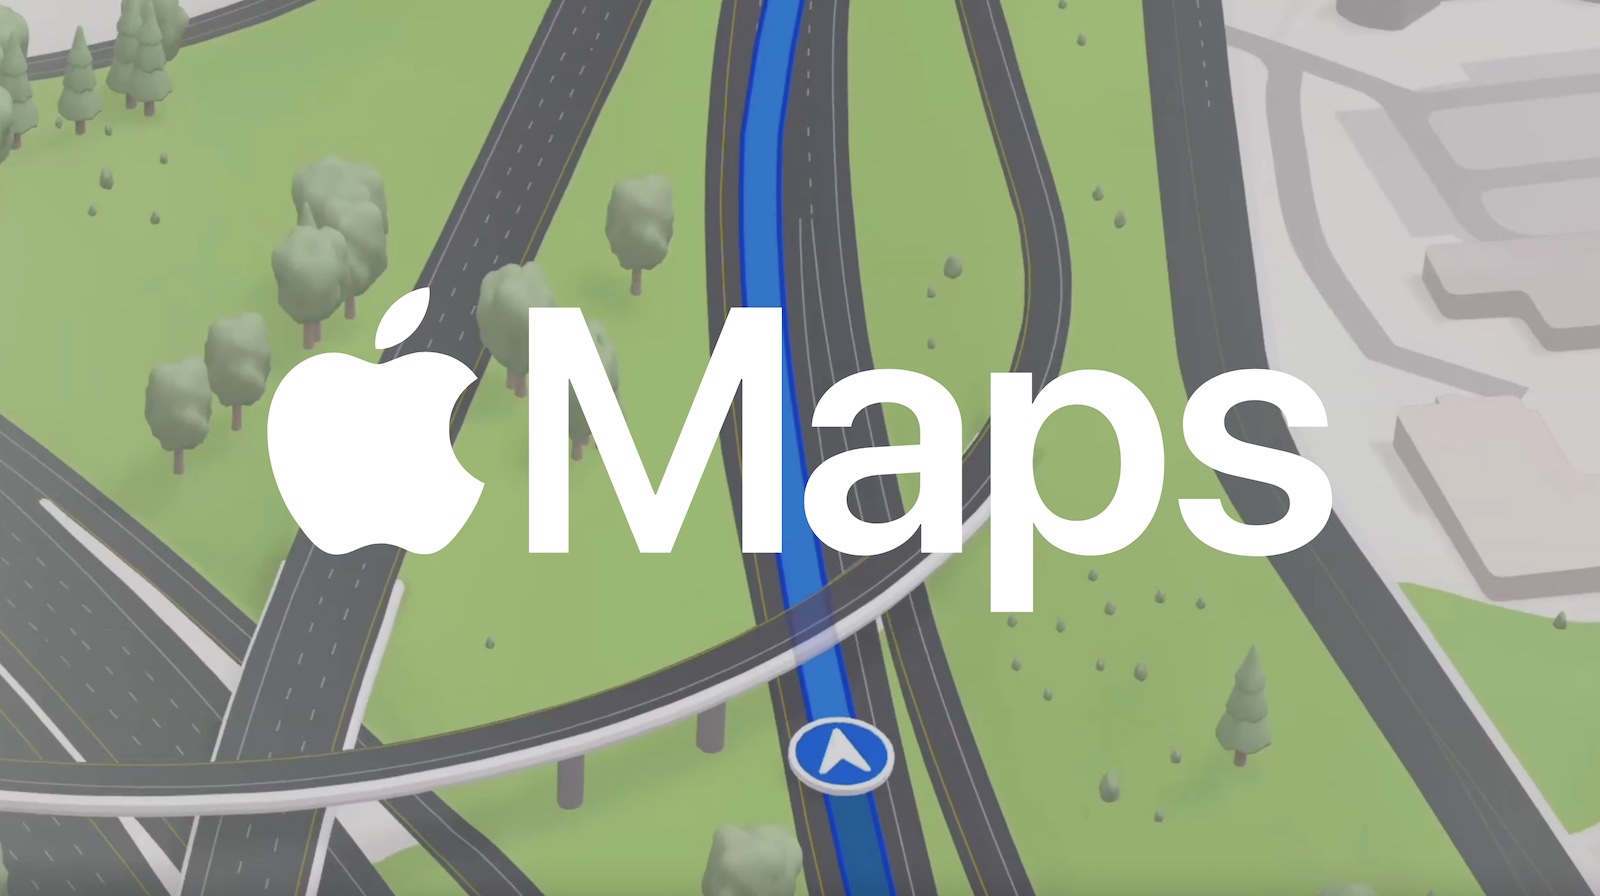 Apple Maps Currently Experiencing Outage [Update: Fixed]